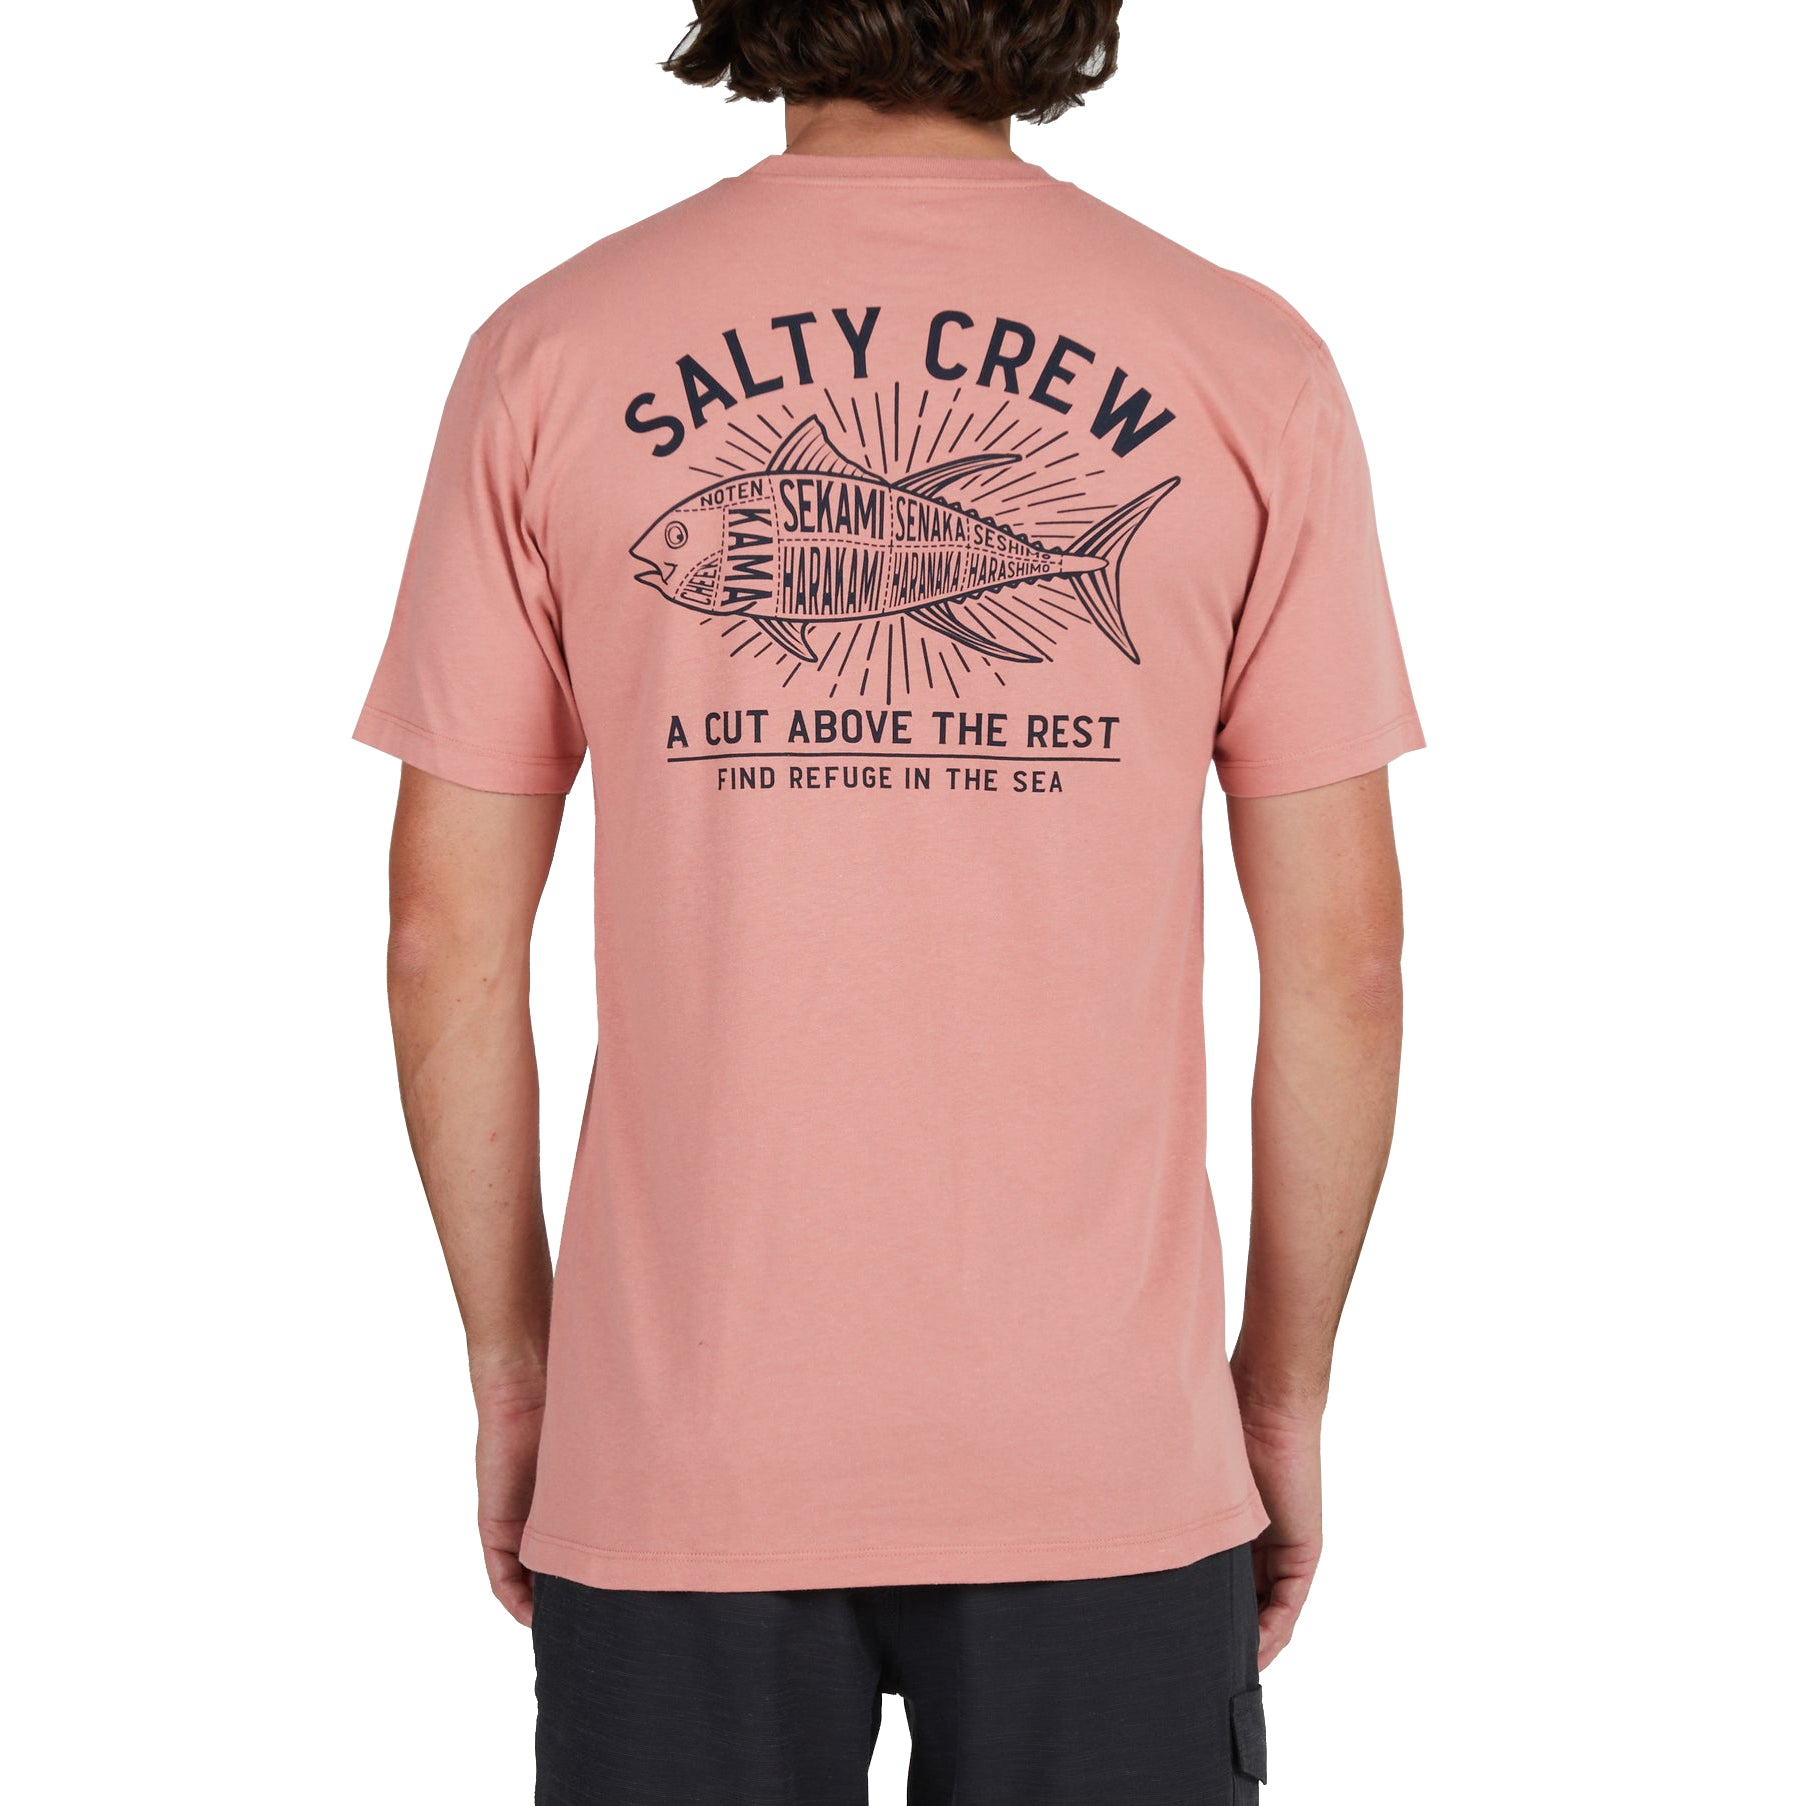 Salty Crew Cut Above SS Tee Coral M